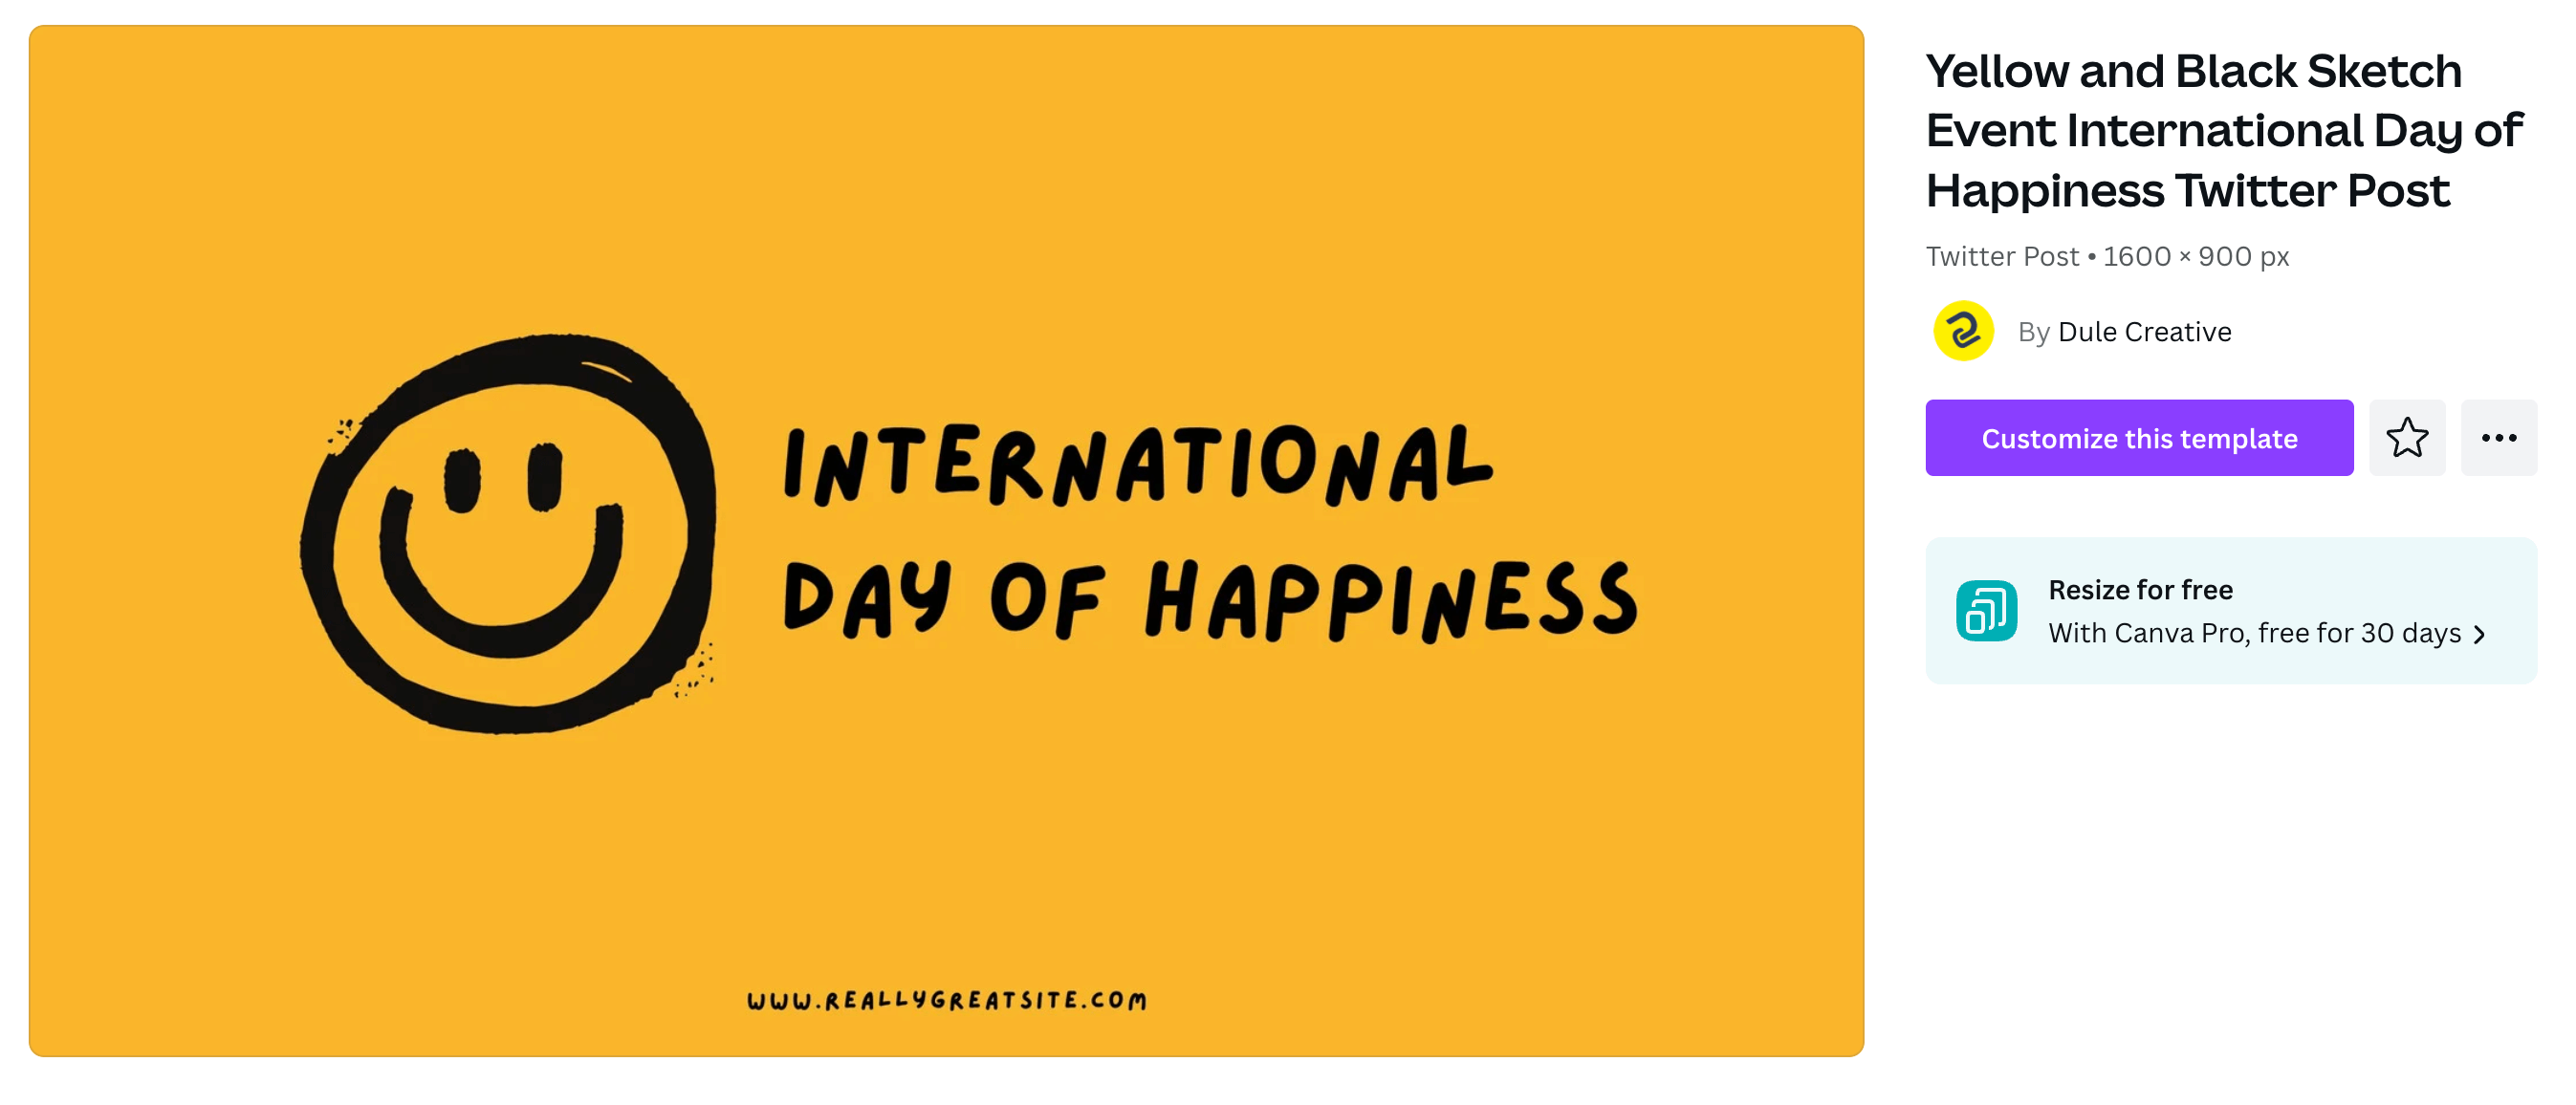 A bright, minimal Twitter post promoting International Day of Happiness